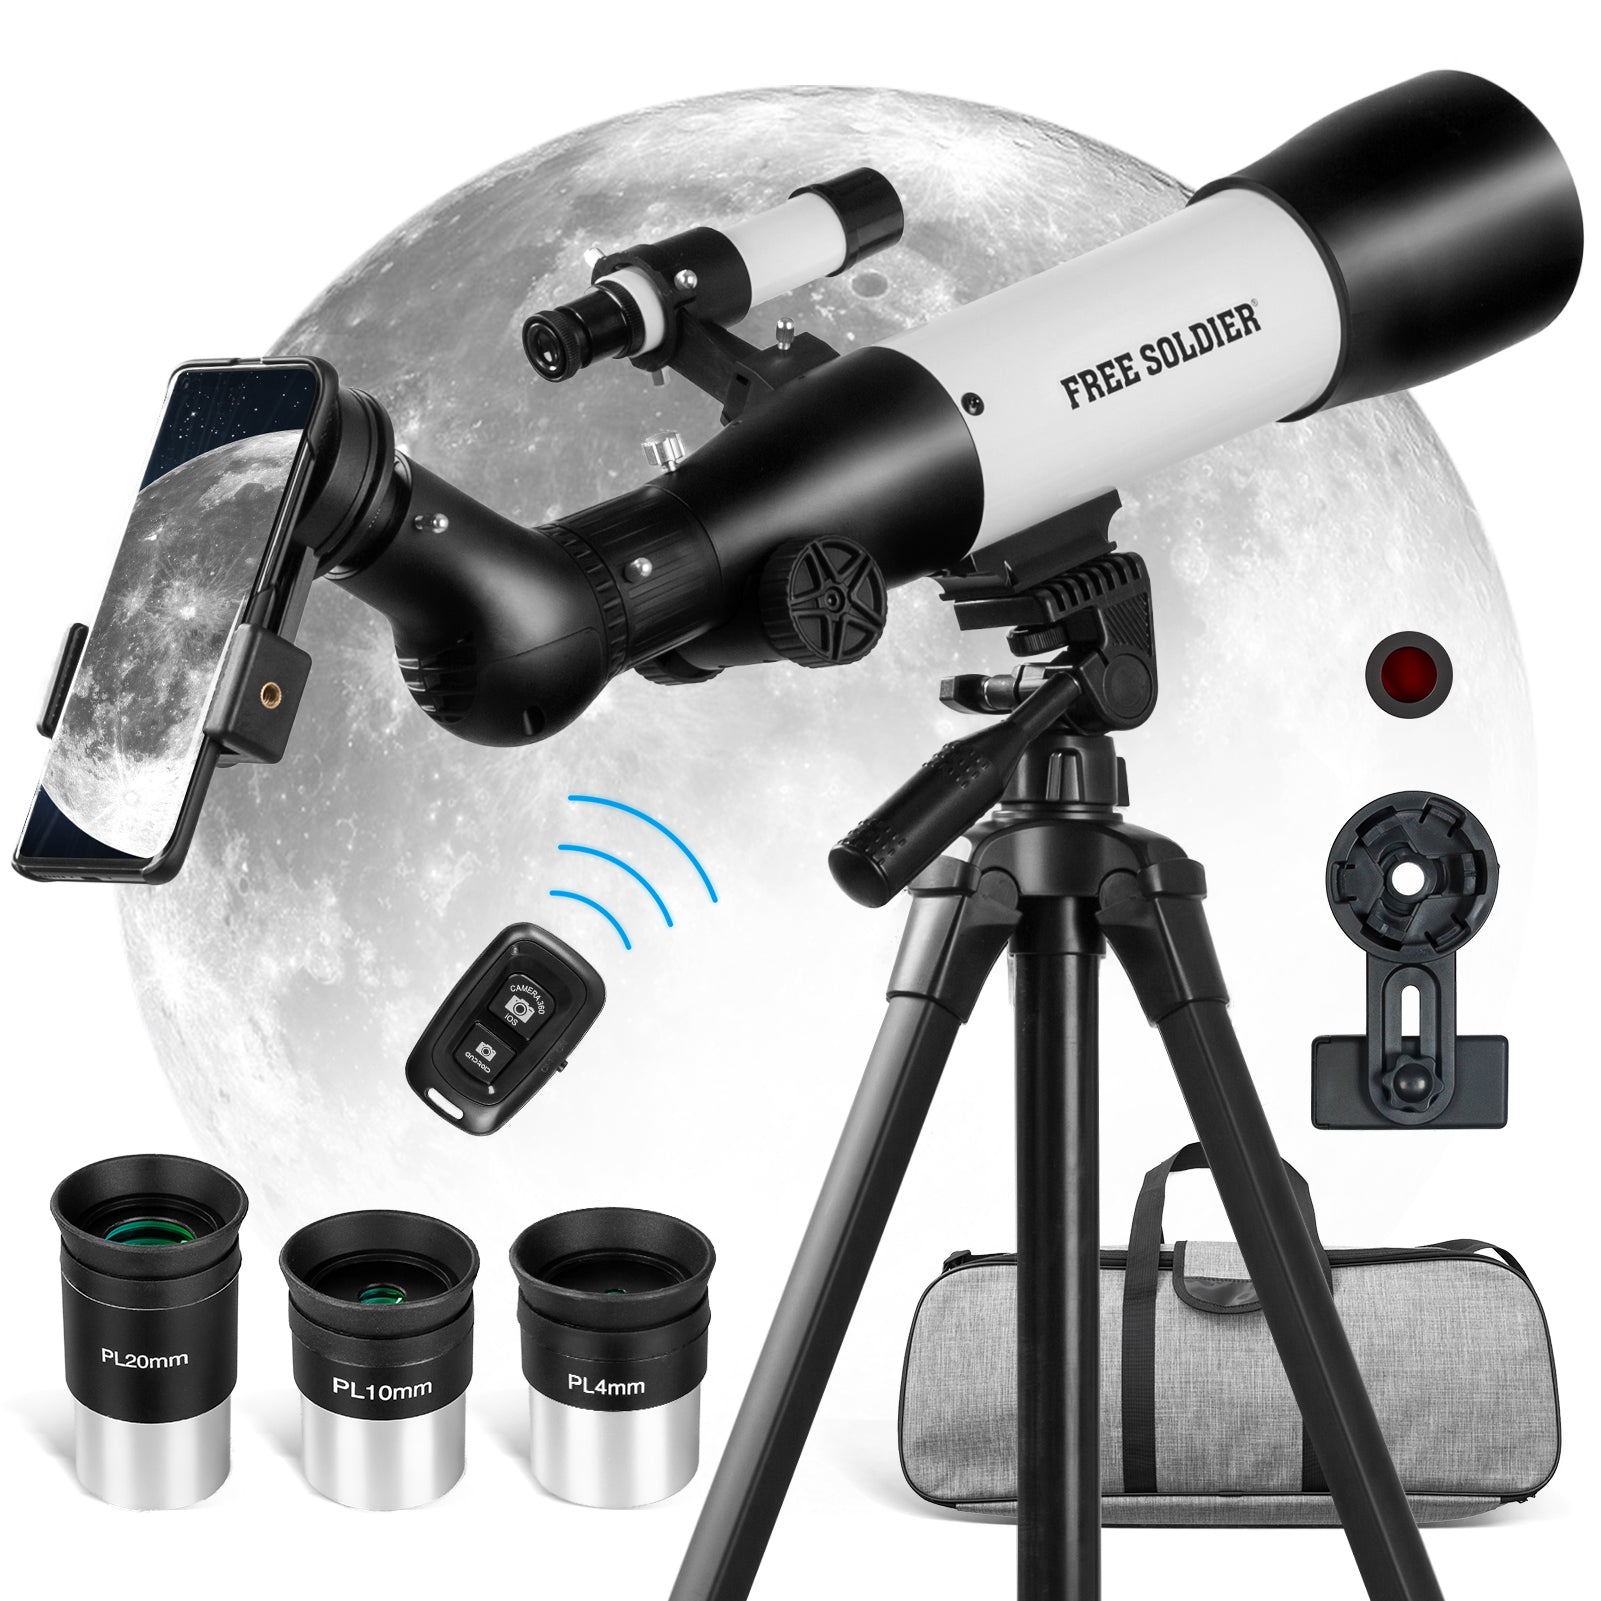 50070mm Astronomy Telescope with 3 Plossl Eyepieces Phone Adapter and Carry Bag - FreeSoldier